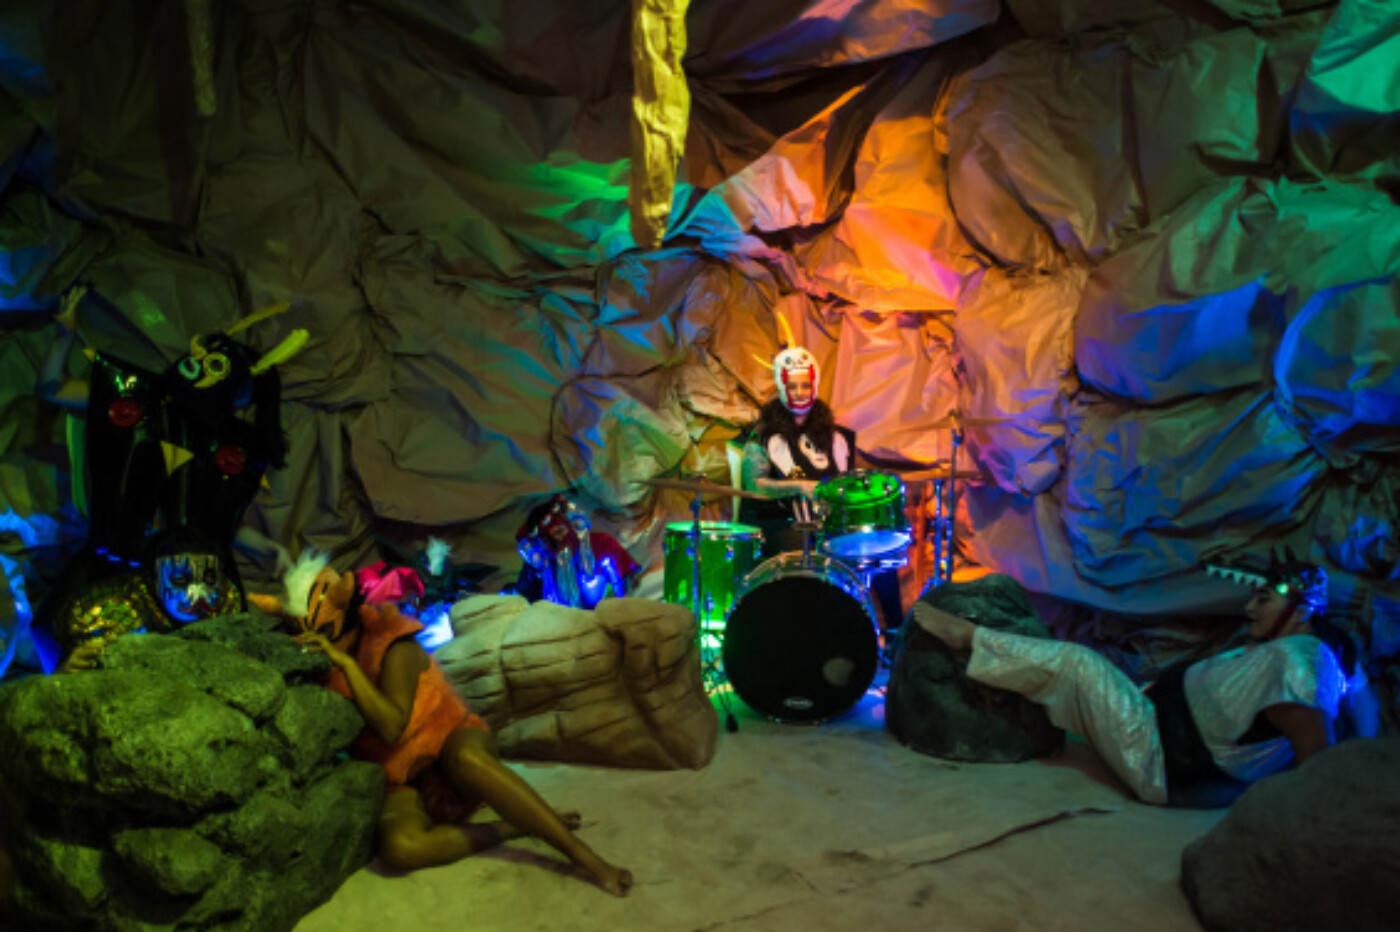 Photograph of a theatrically lit interior that looks like a cave. A performer is playing a drum kit, while a performer is draped over a large rock at left.